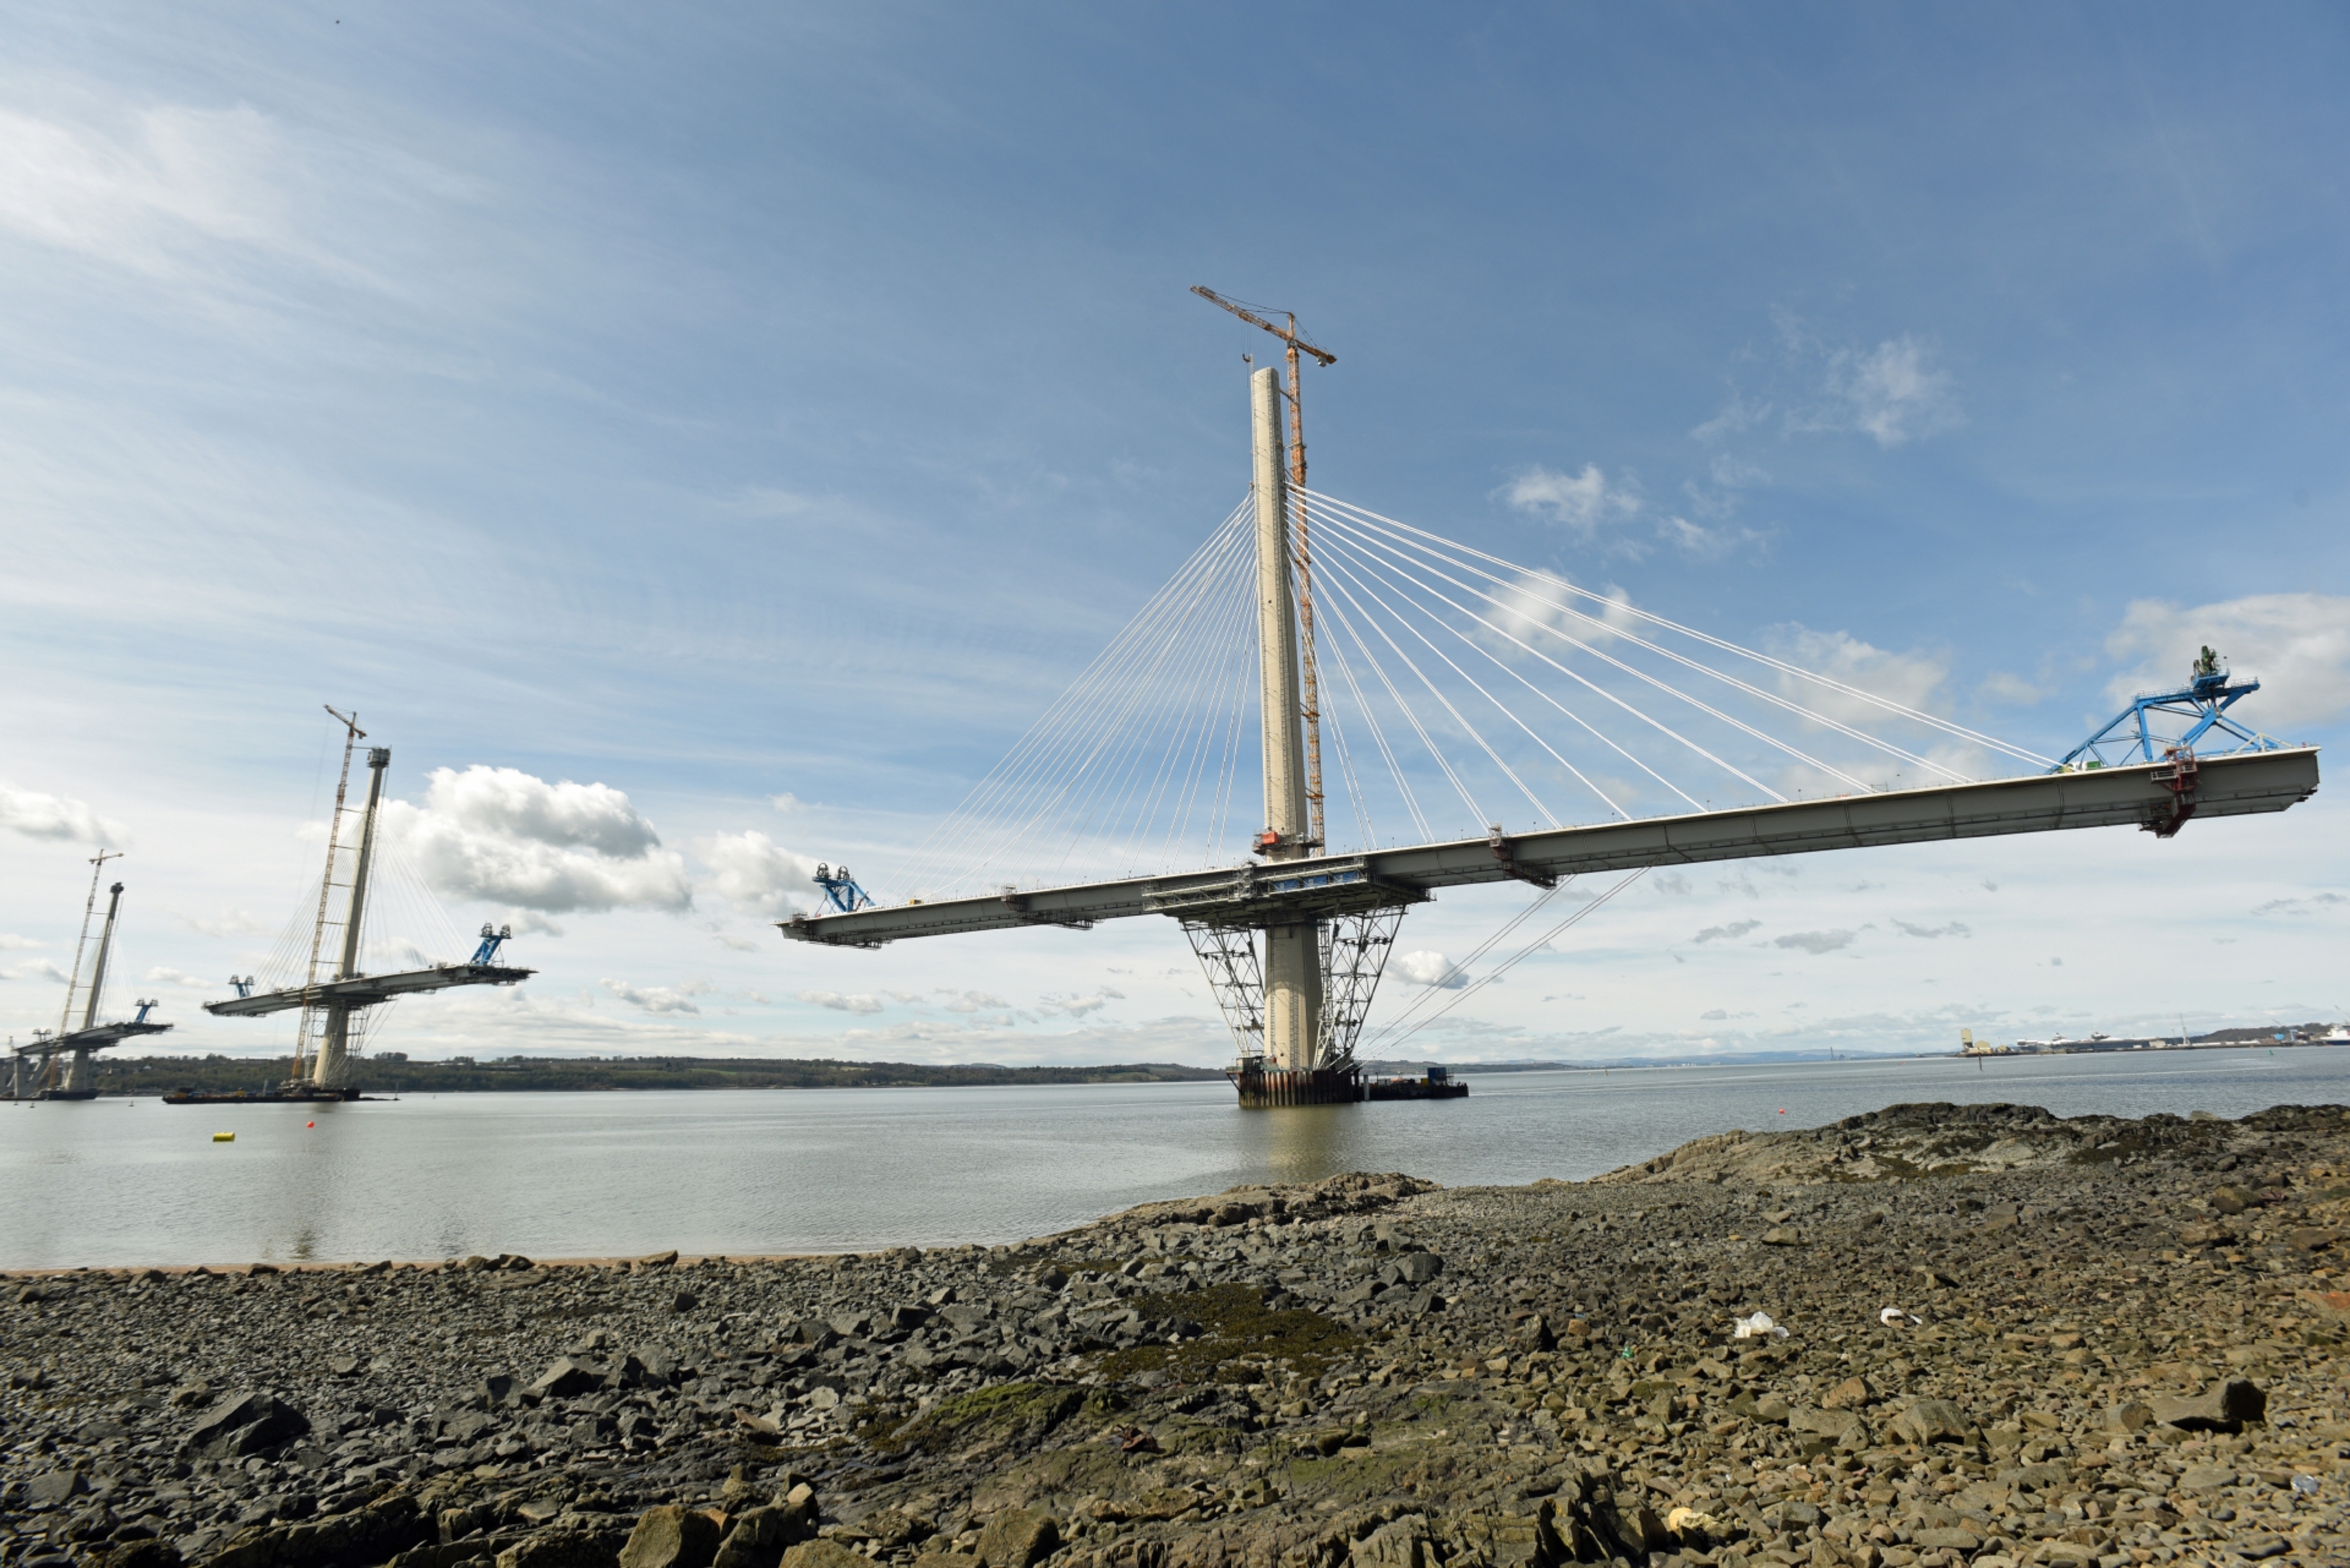 The Queensferry Crossing is still under construction